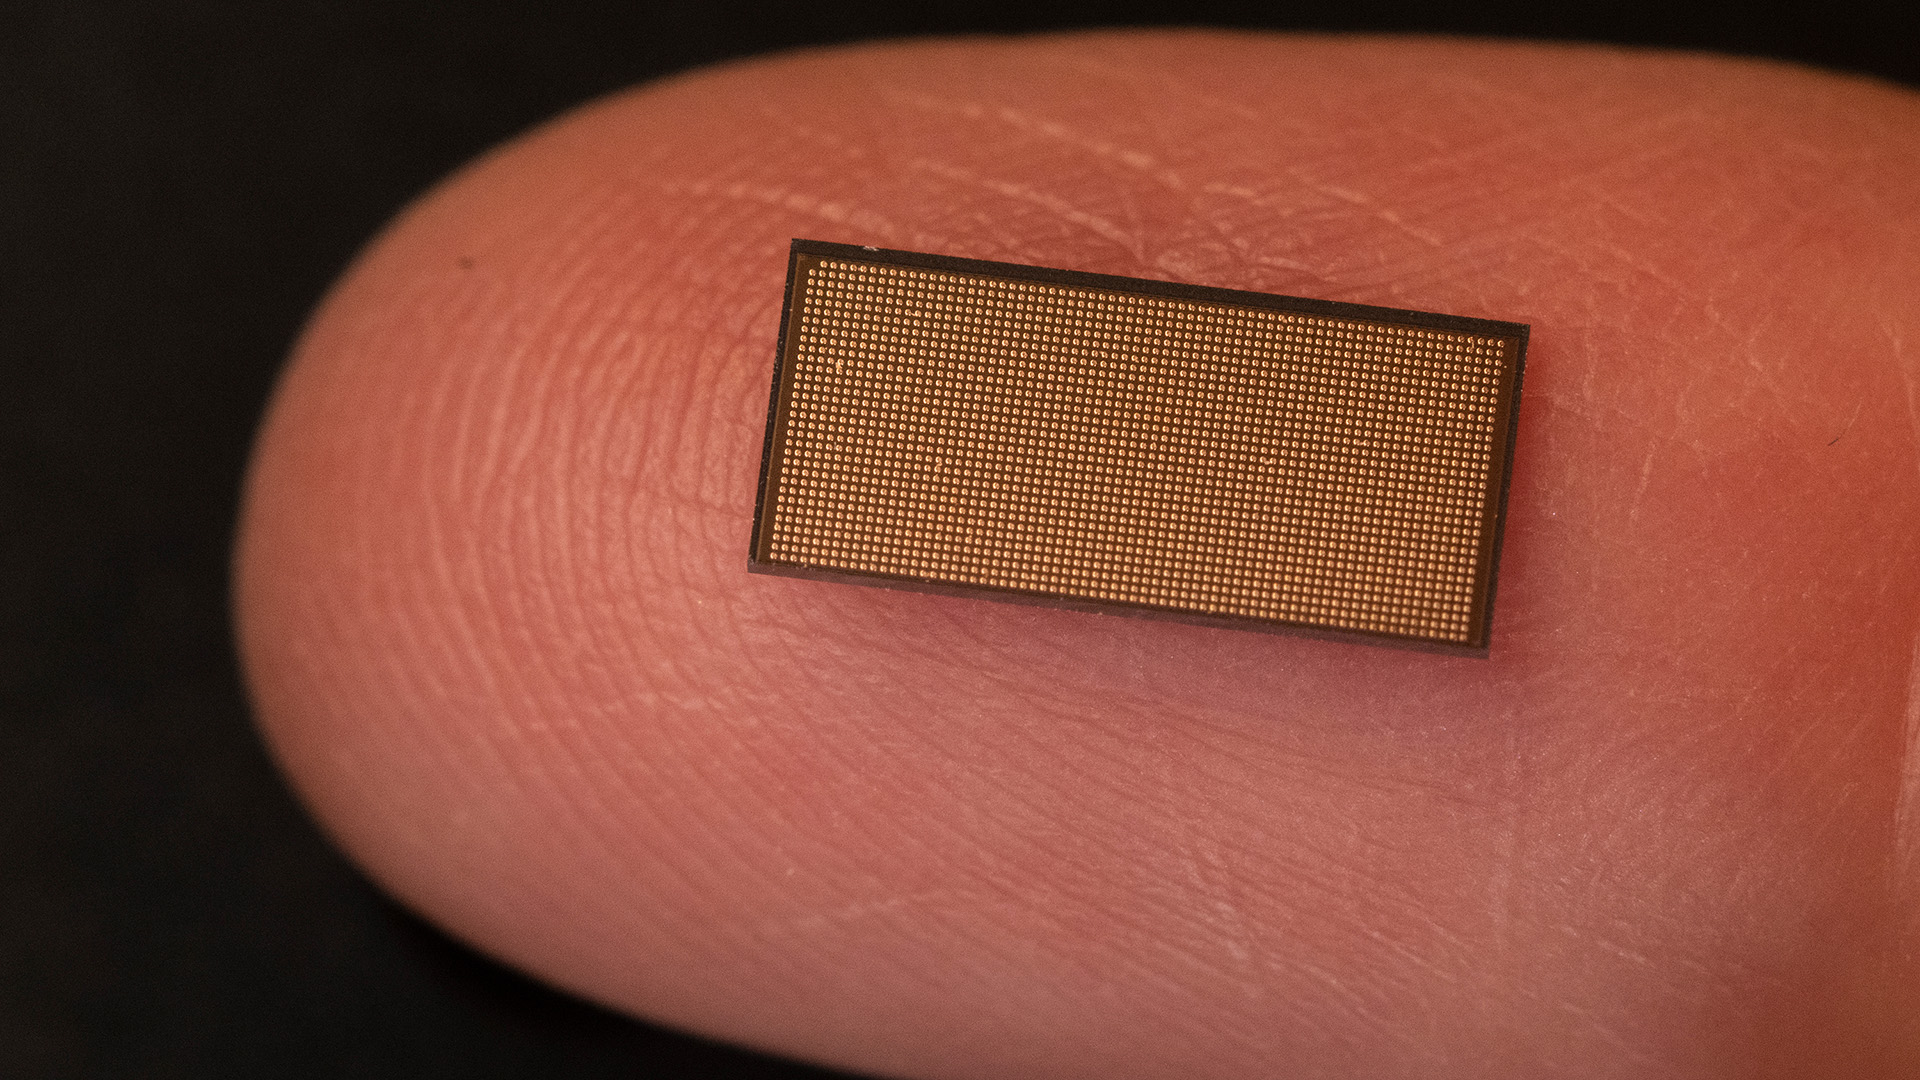 Intel's Loihi 2 chip on the tip of a finger